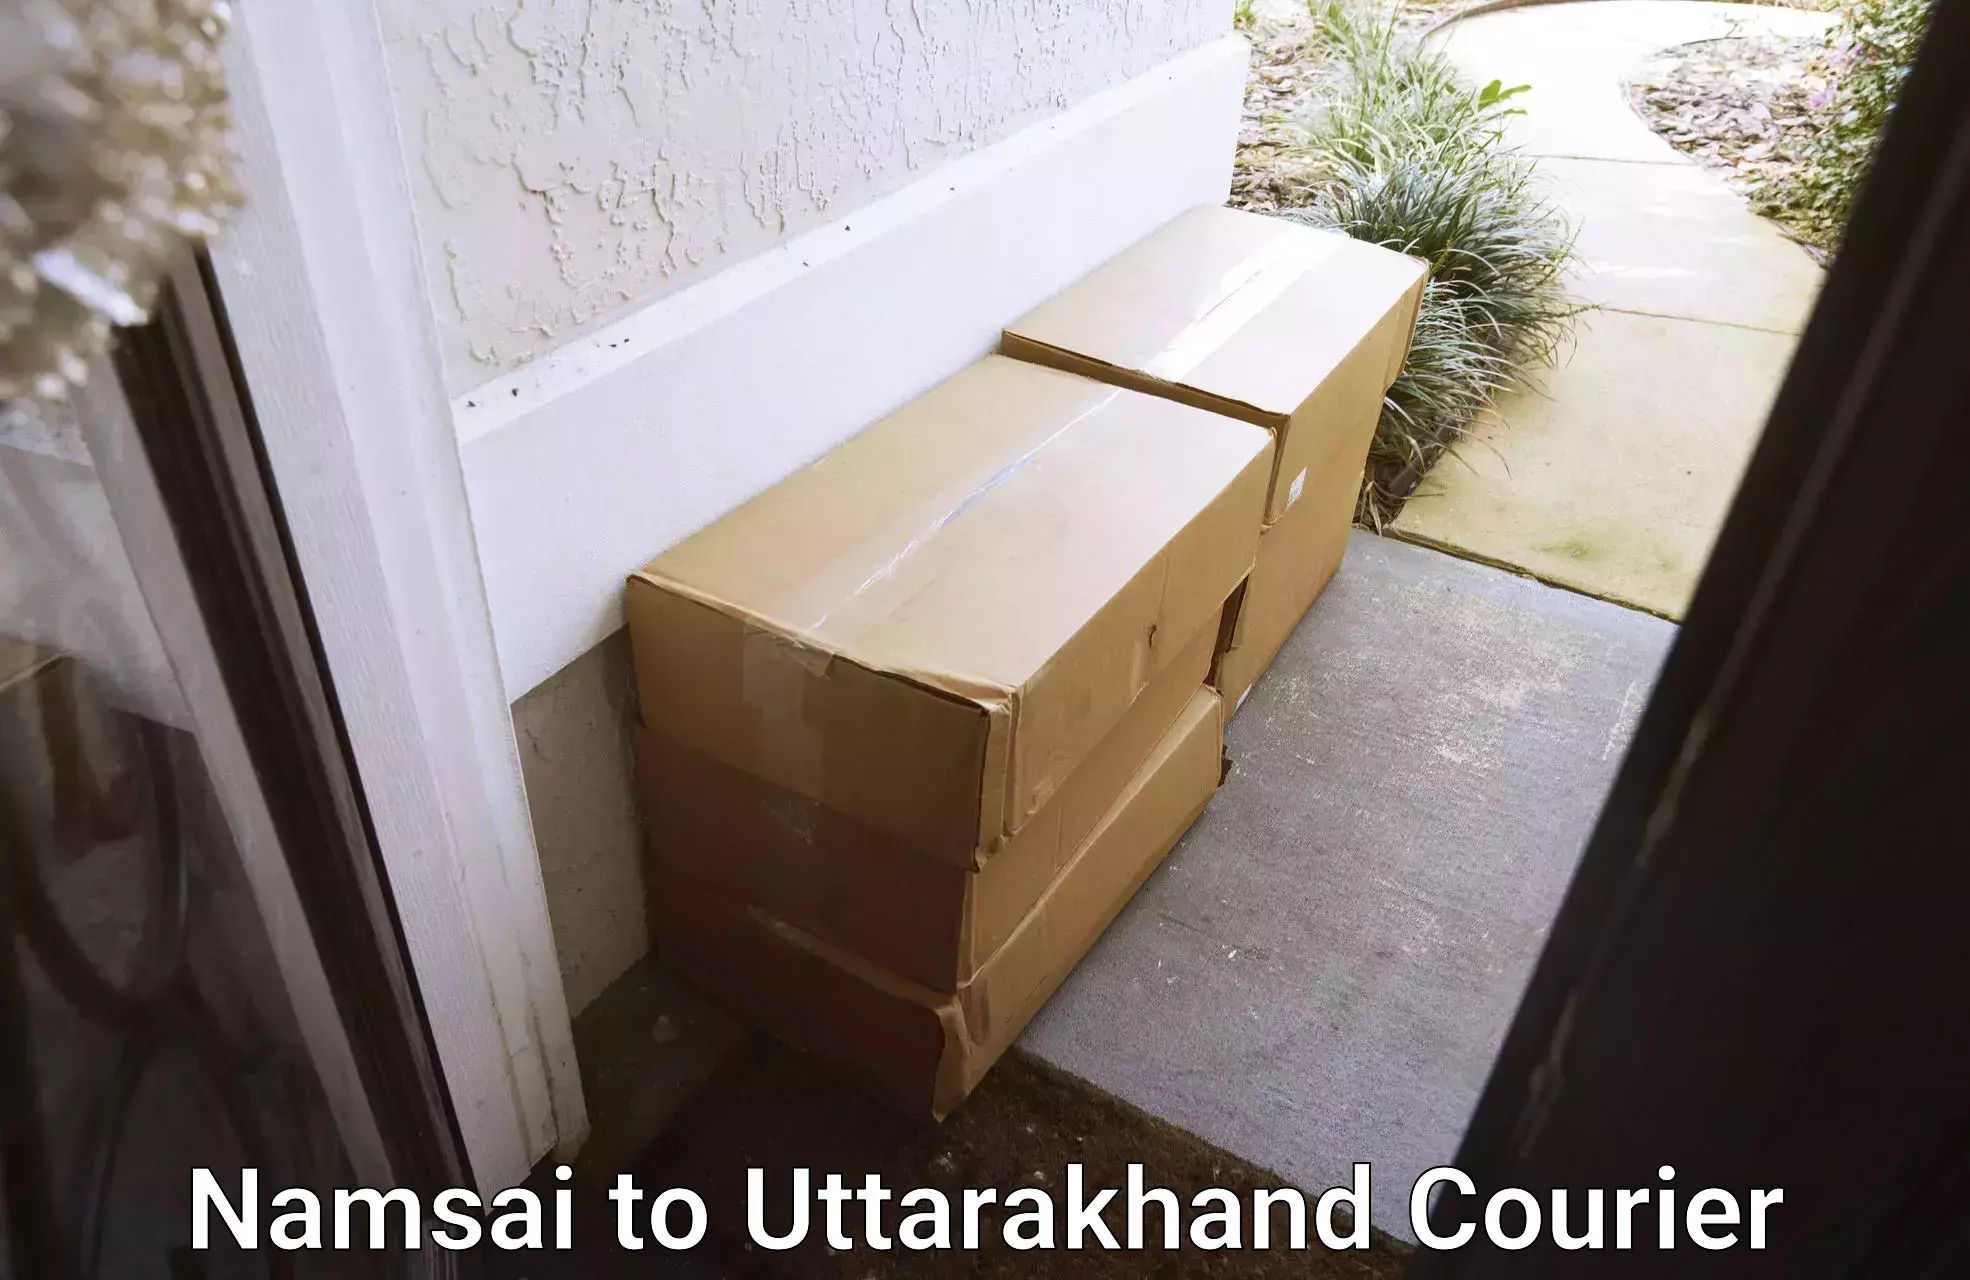 Delivery service partnership in Namsai to Uttarakhand